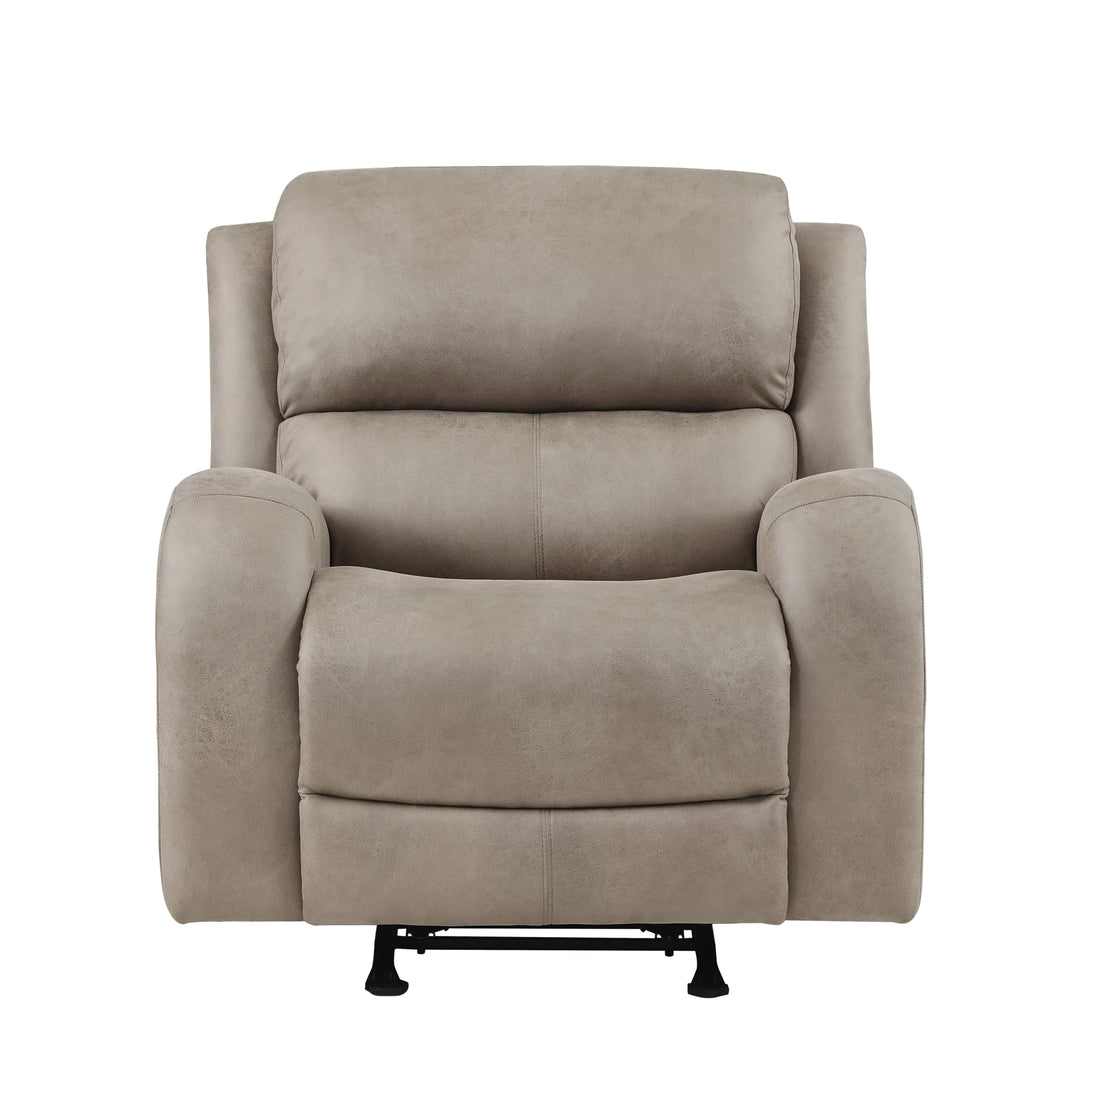 Luxurious Style Rocker Reclining Chair Brown Plush brown-primary living